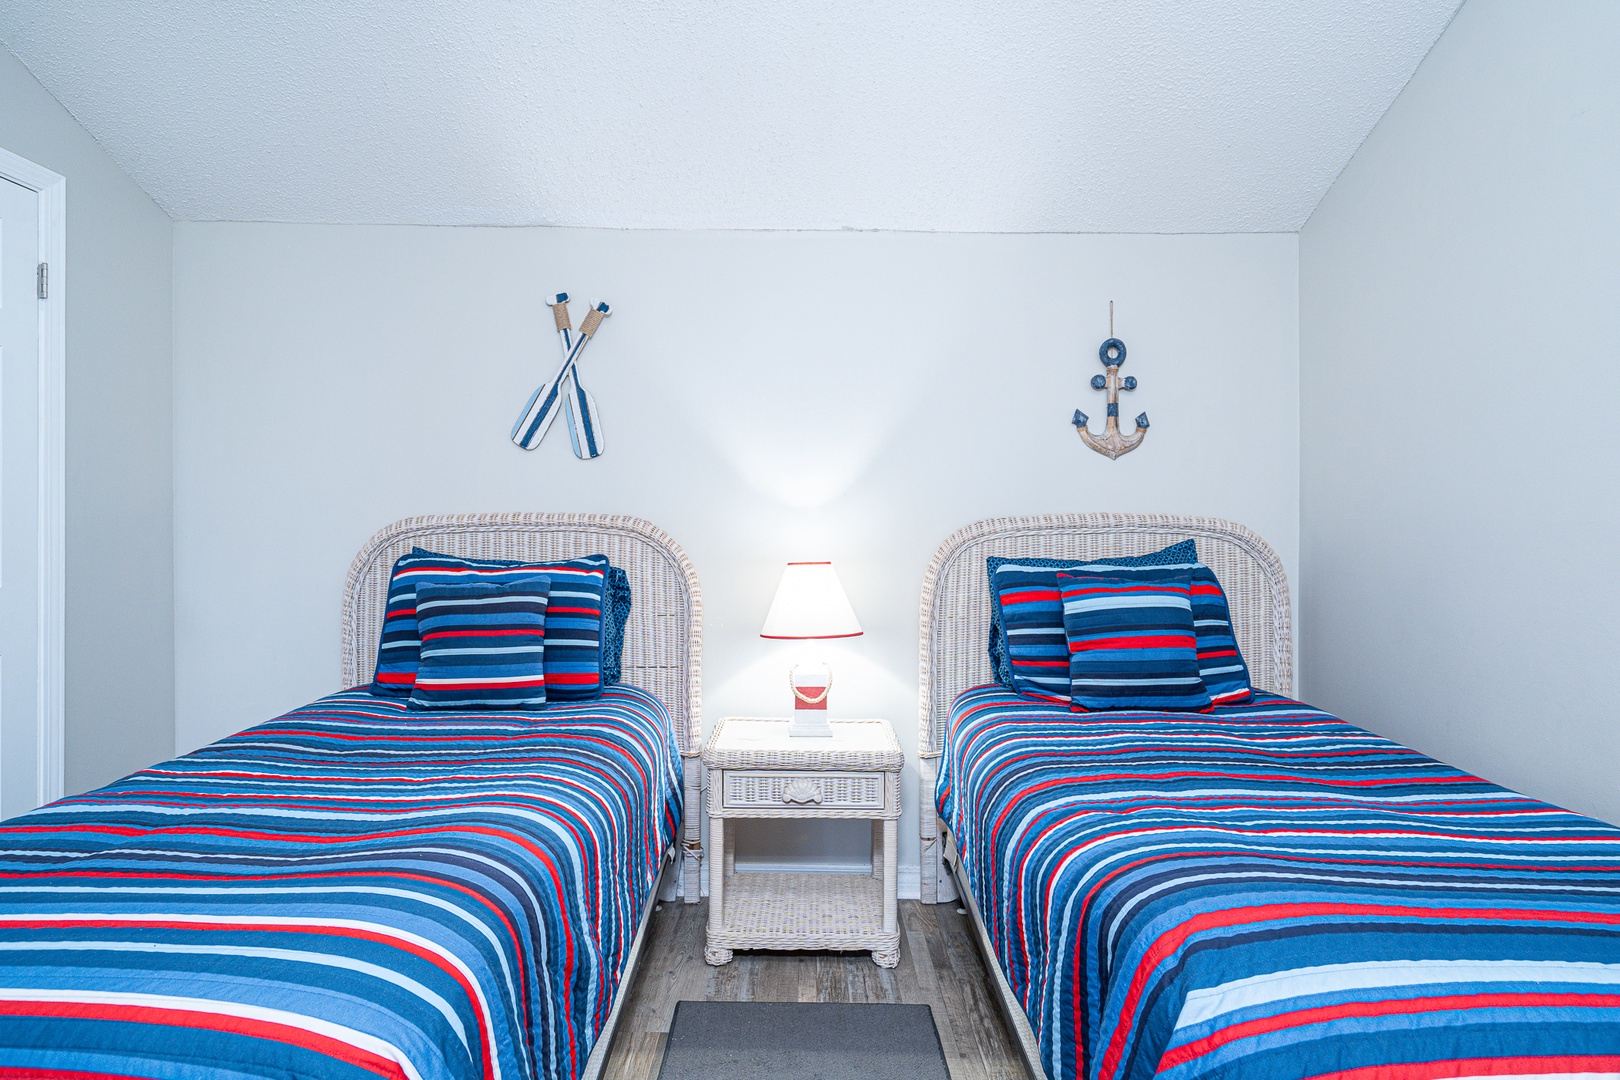 The upstairs loft sleeping area showcases a pair of cozy twin-sized beds